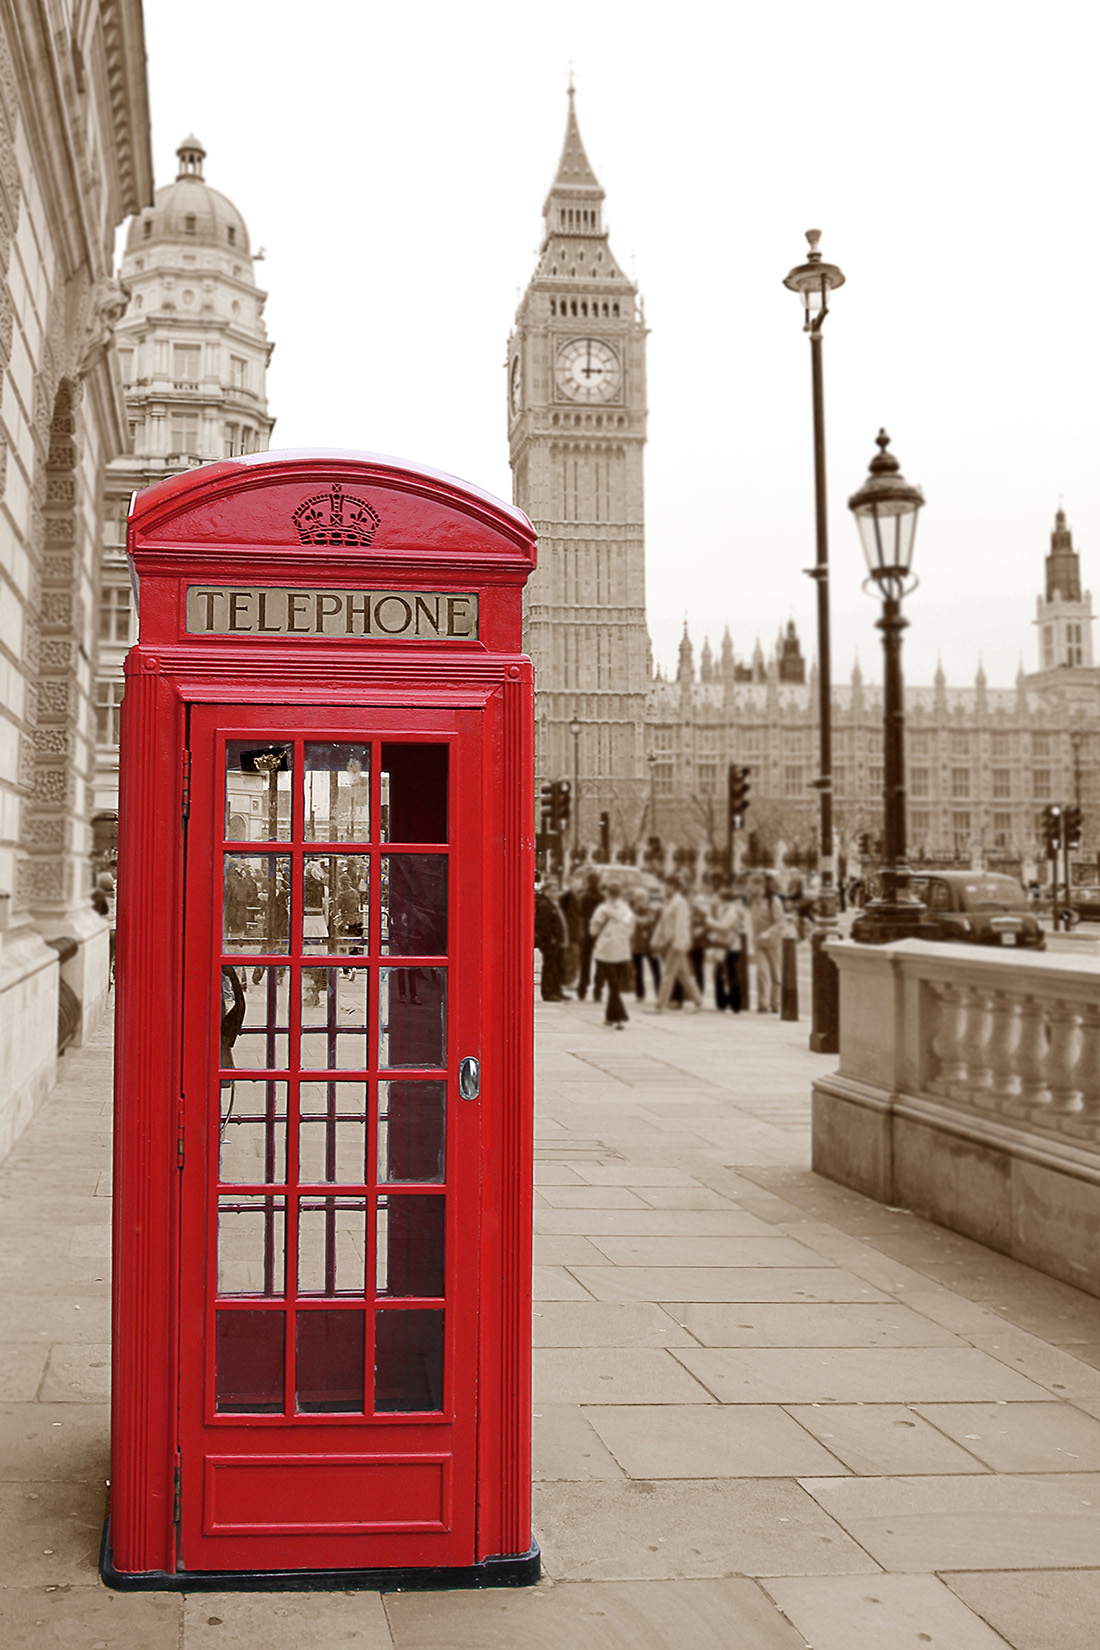 British Red Phone Booth In London - Red Telephone Booth London - HD Wallpaper 